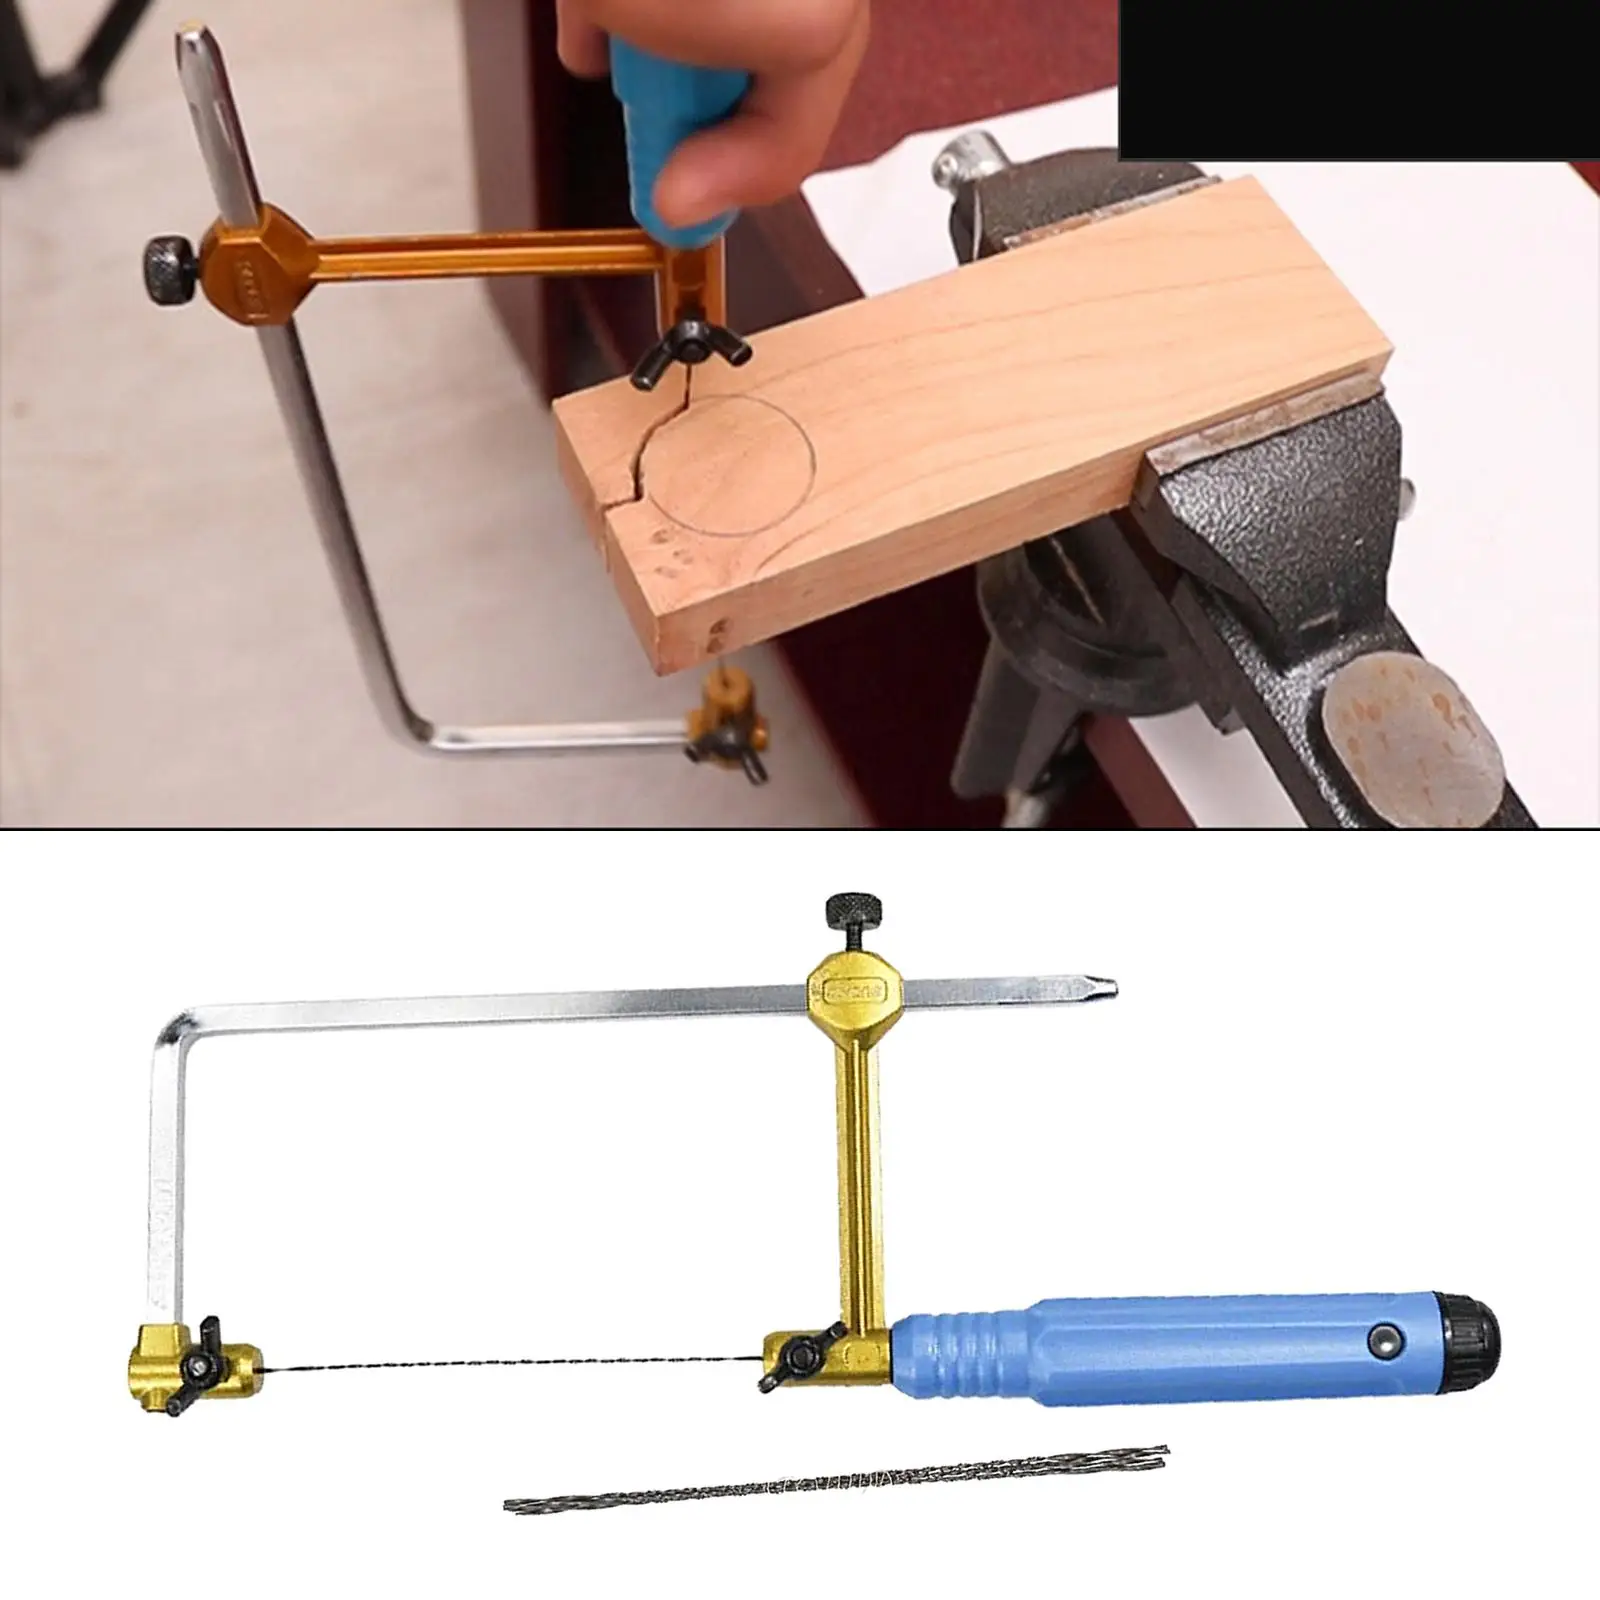 Hand Coping Saw Frame and Blades Set Adjustable Jewelers Saw for Jewelry Making Tool